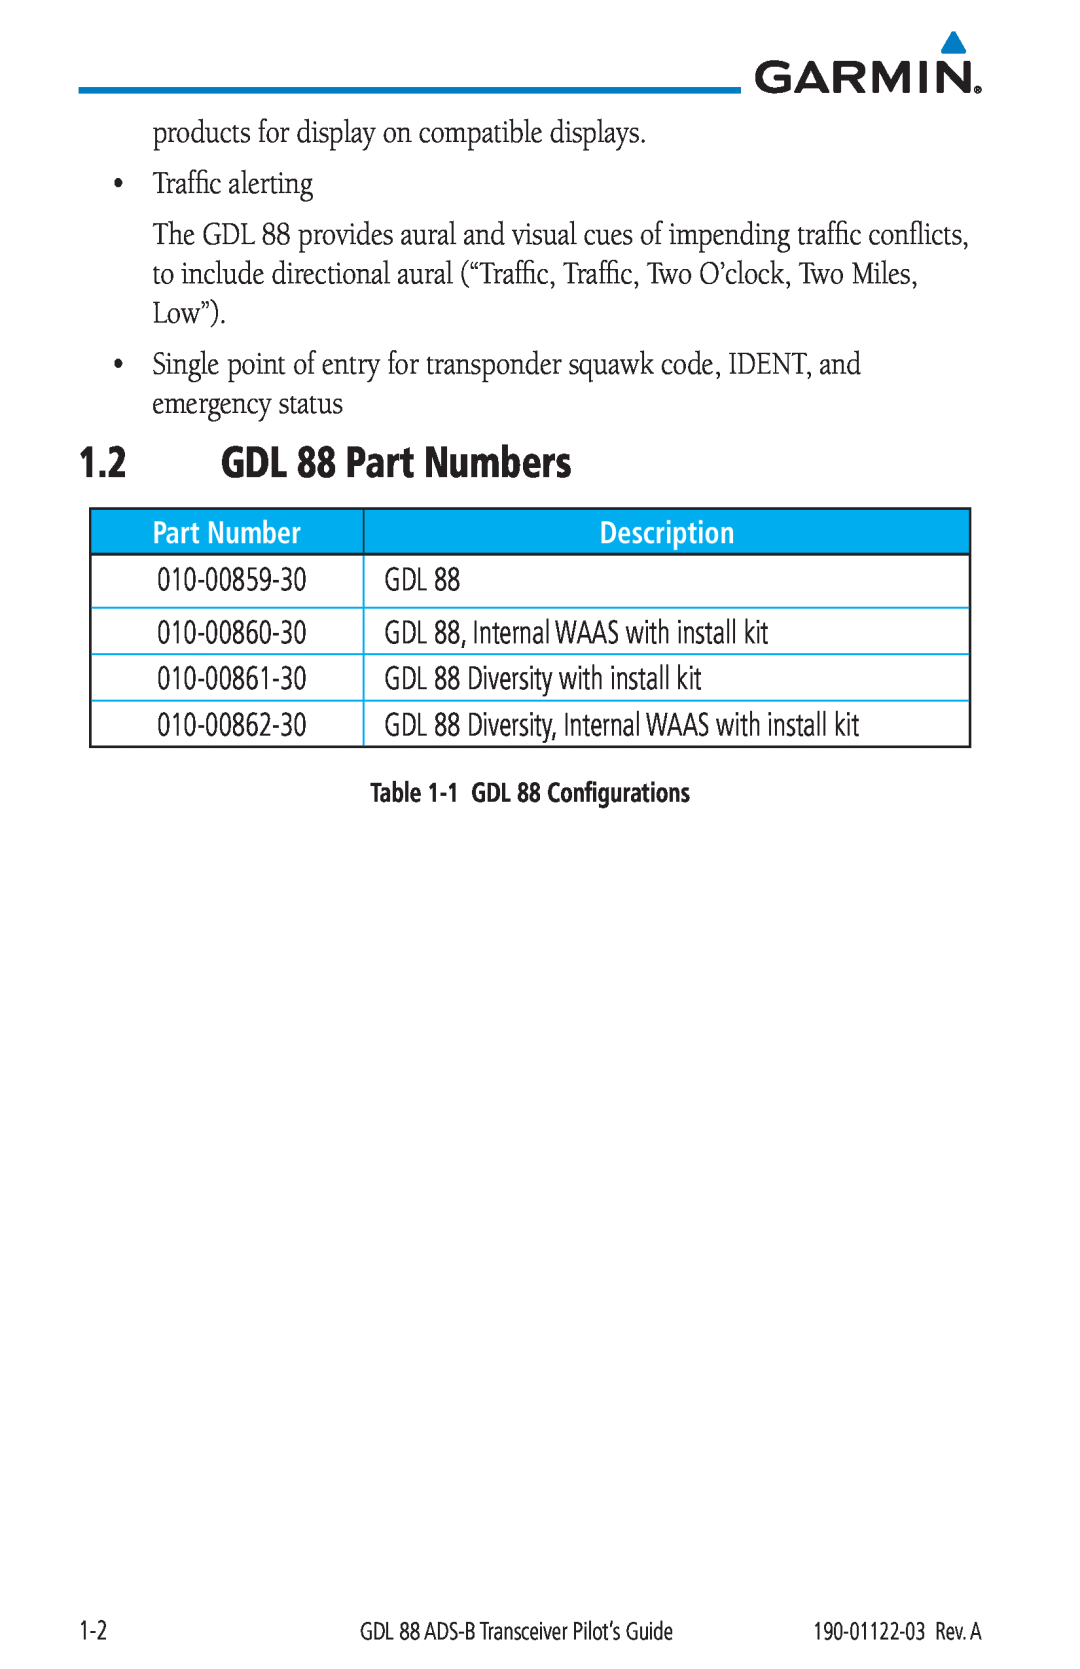 Garmin manual GDL 88 Part Numbers, products for display on compatible displays 